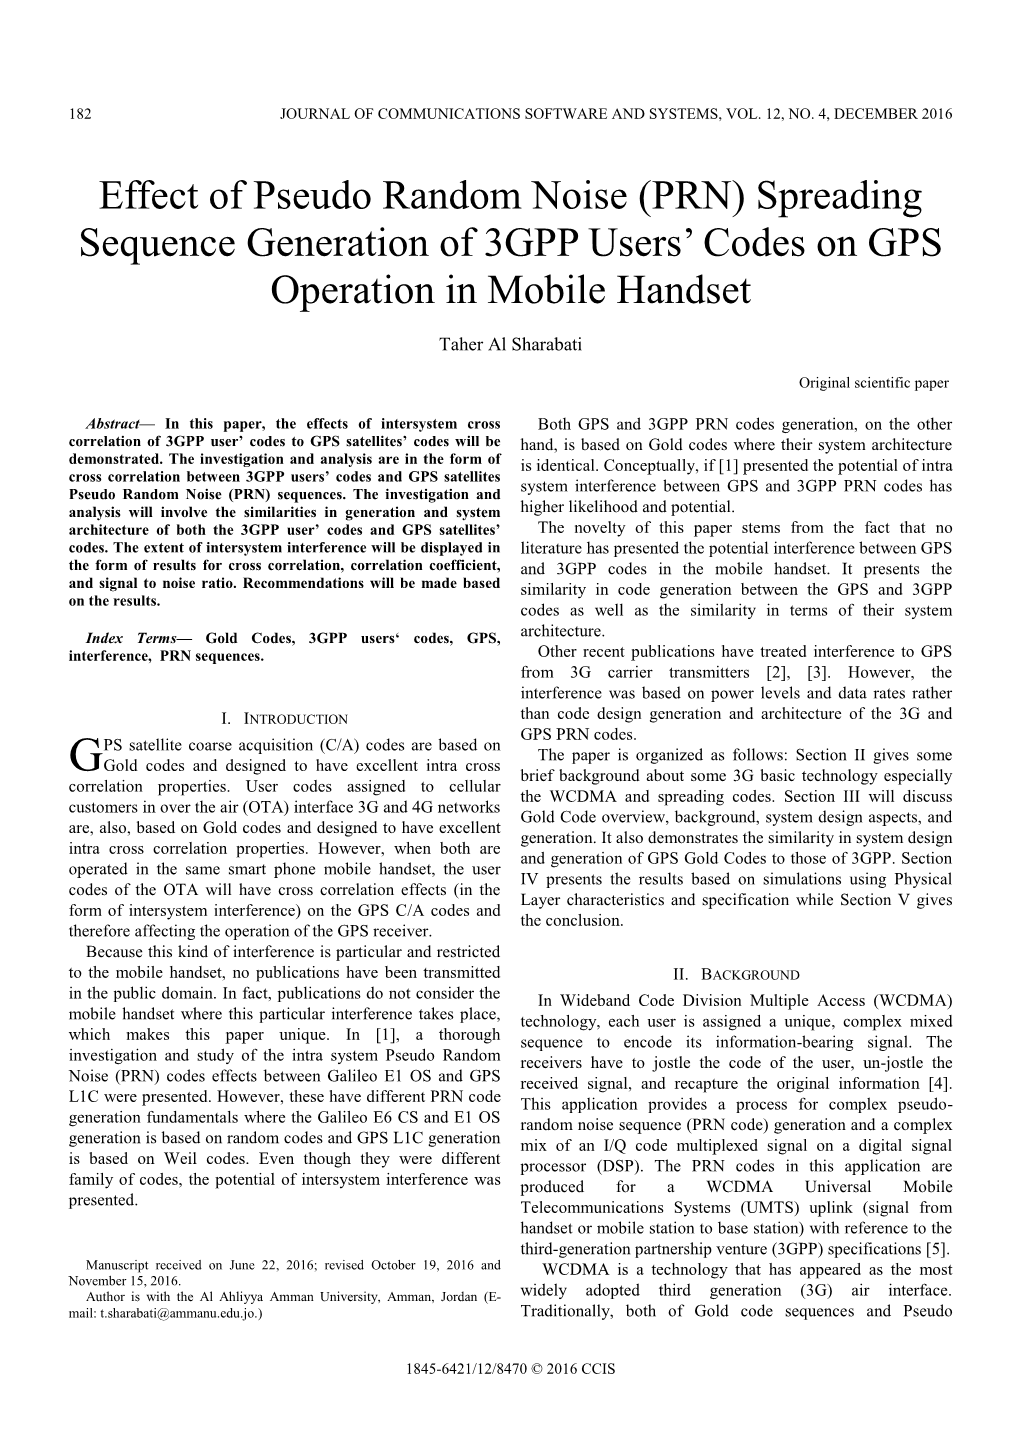 Effect of Pseudo Random Noise (PRN) Spreading Sequence Generation of 3GPP Users’ Codes on GPS Operation in Mobile Handset